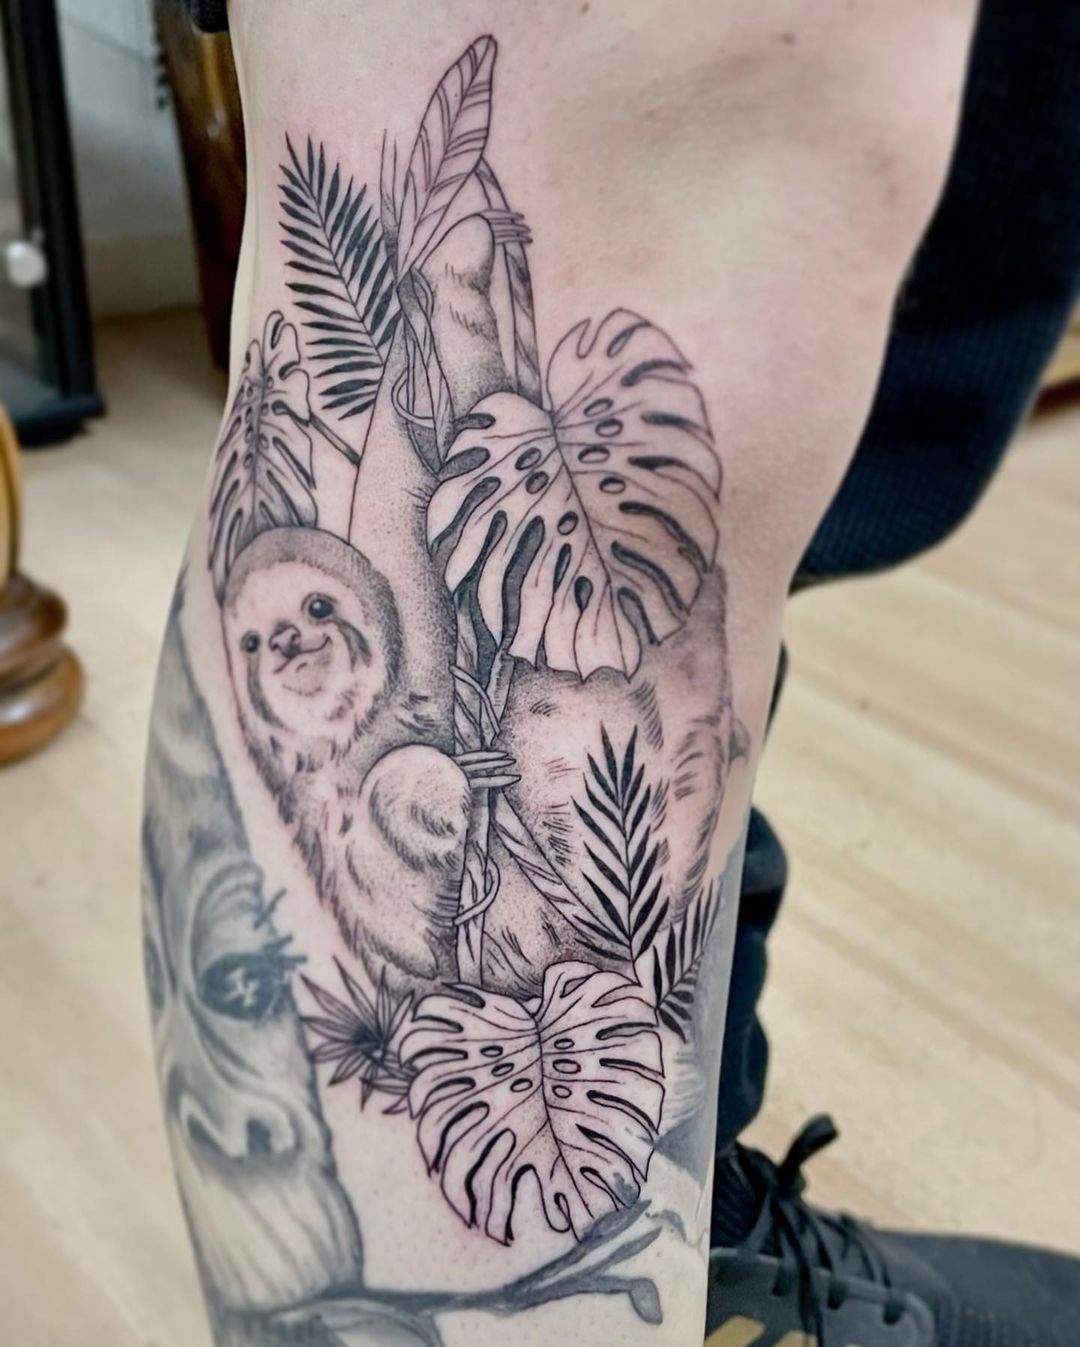 89 Stylish And Adorable Sloth Tattoo Ideas One Would Love To Have  Psycho  Tats